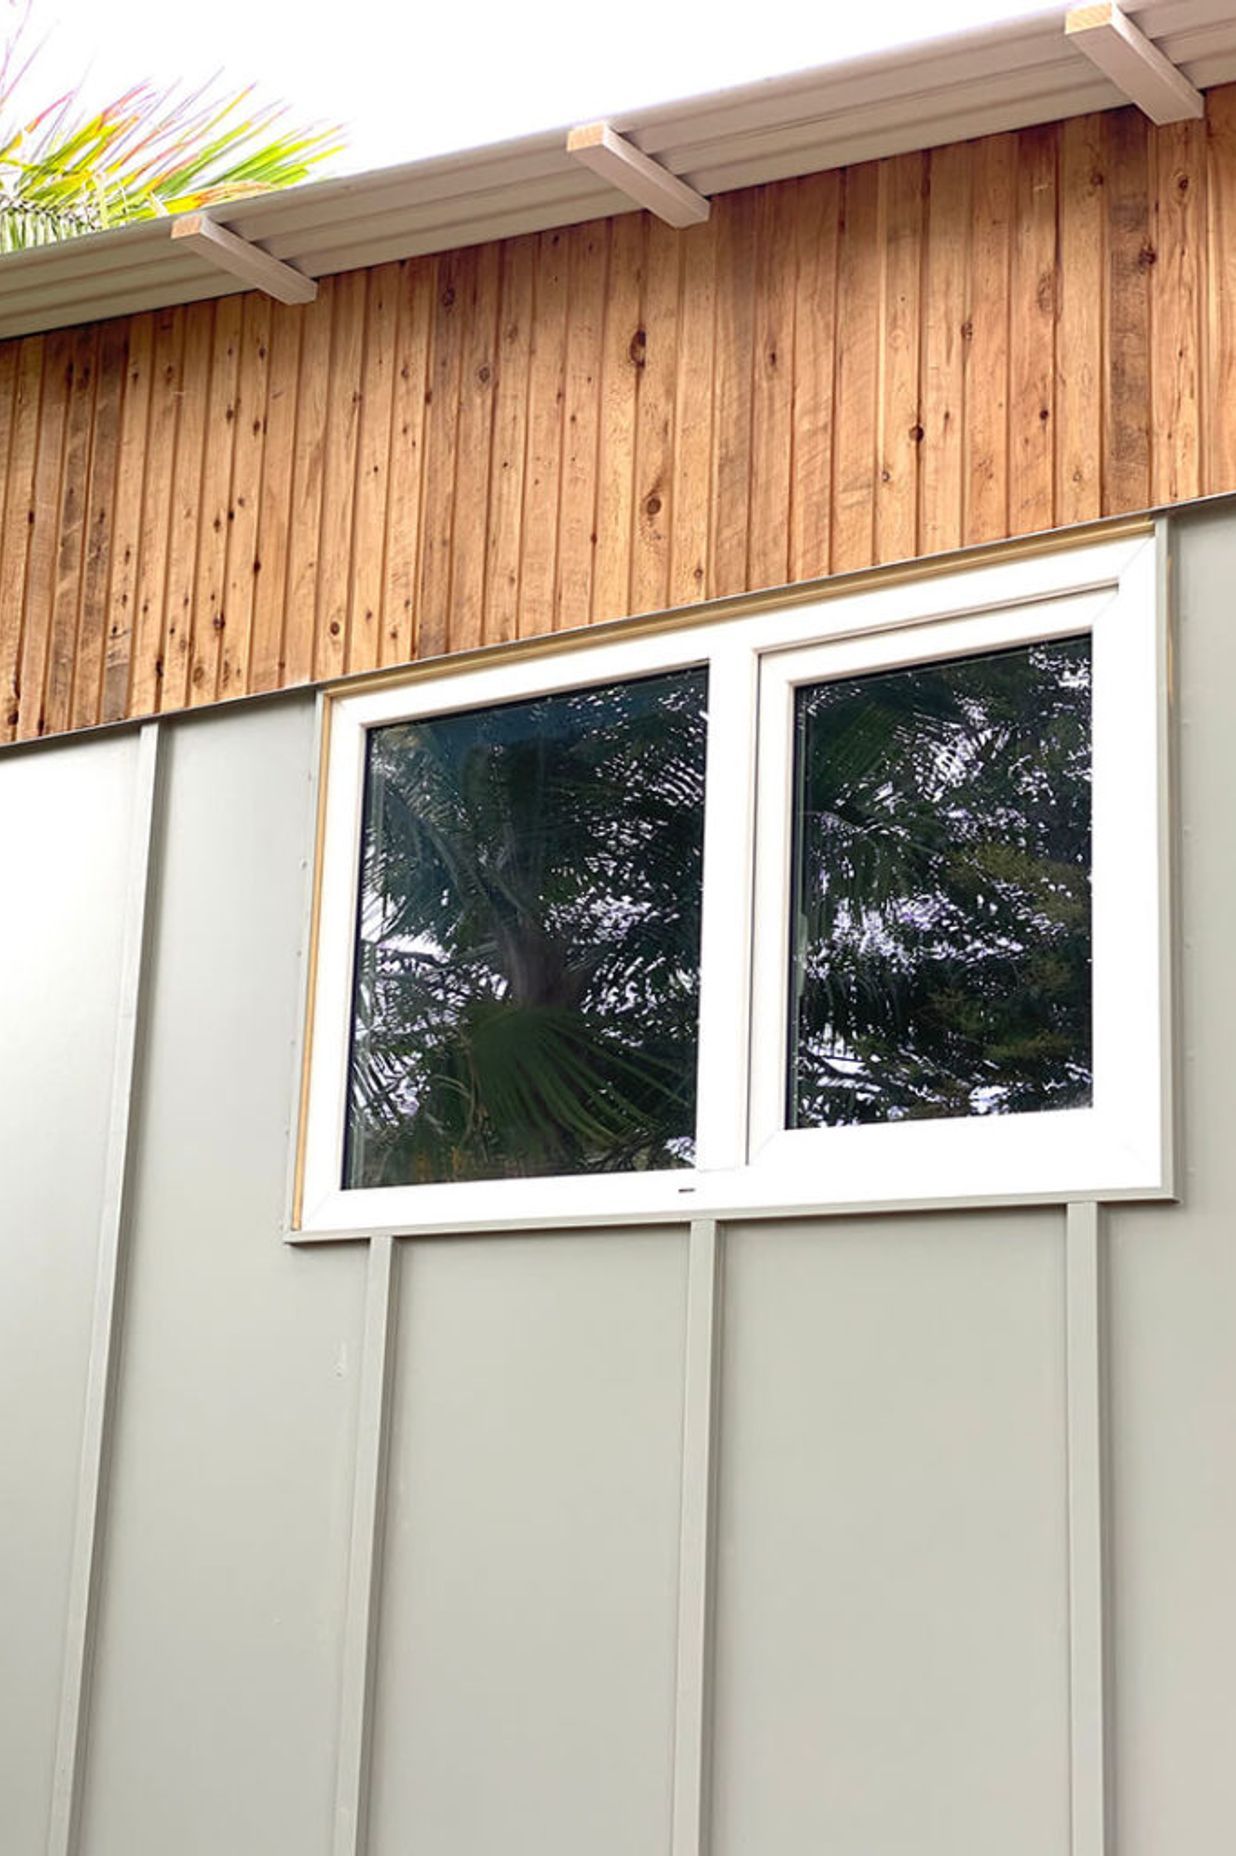 SINGLE VS DOUBLE VS TRIPLE: WHICH WINDOW IS RIGHT FOR YOUR ENERGY-EFFICIENT HOME?